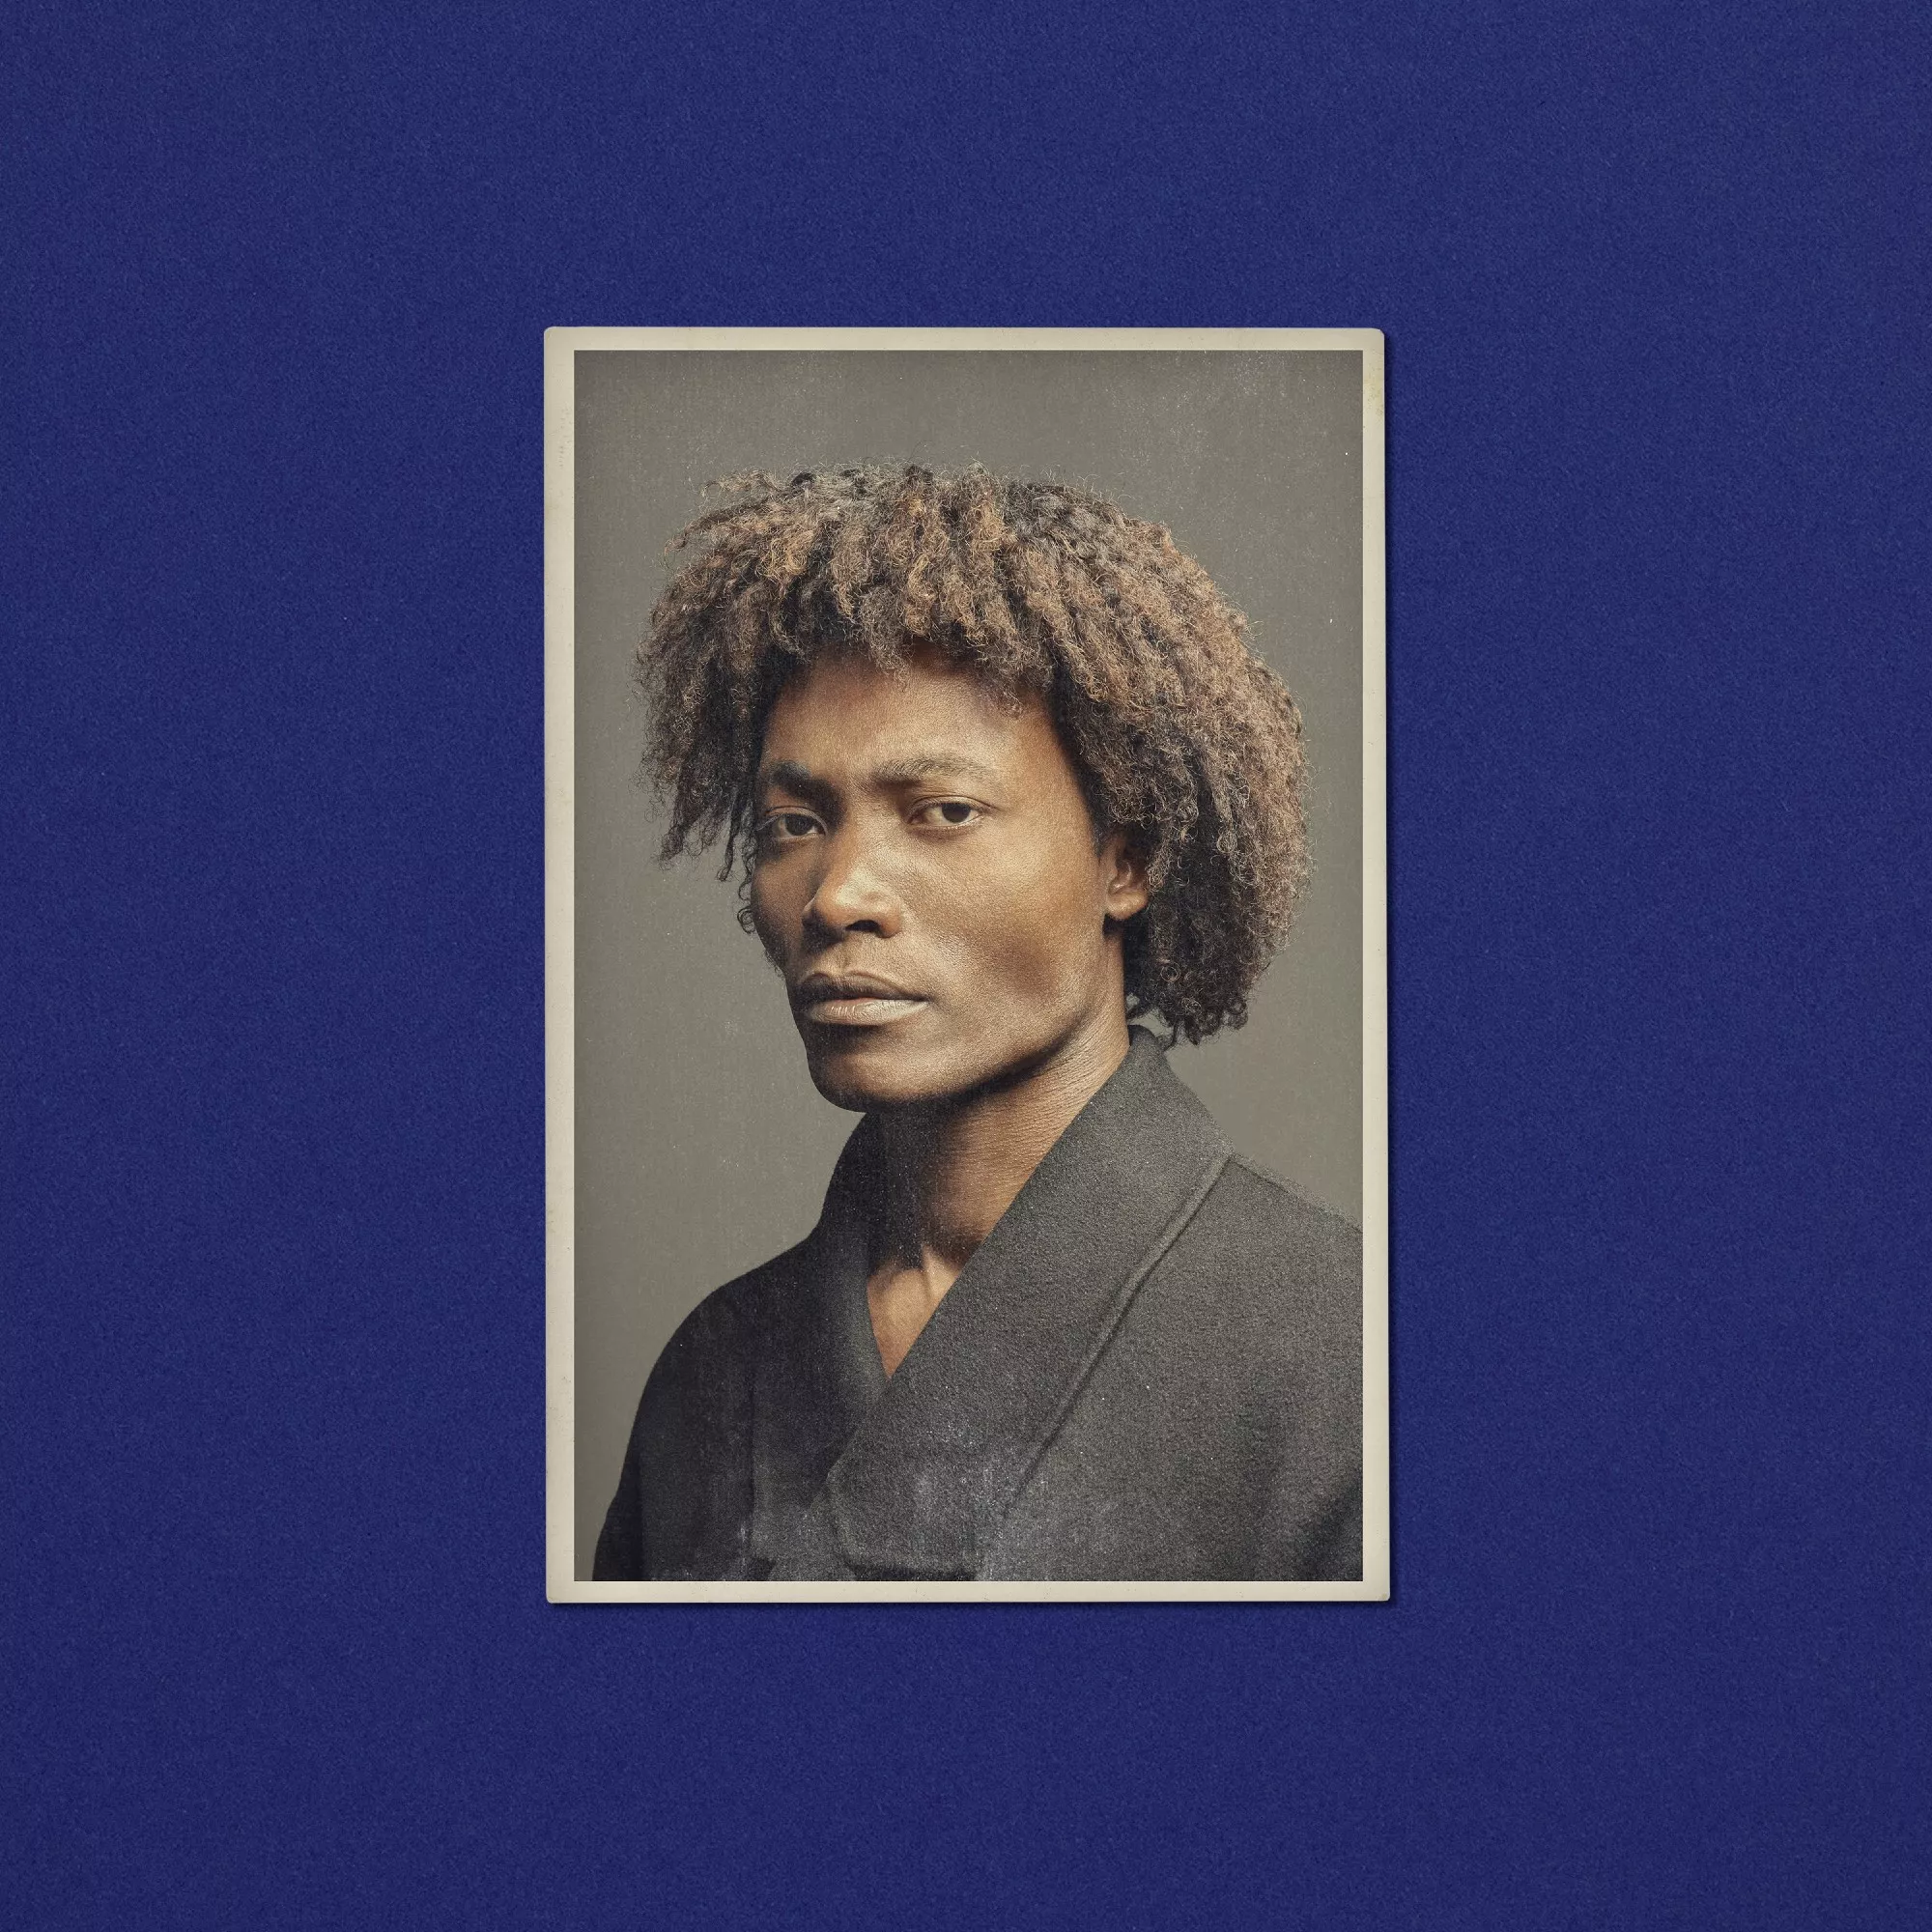 And I Have Been - Benjamin Clementine